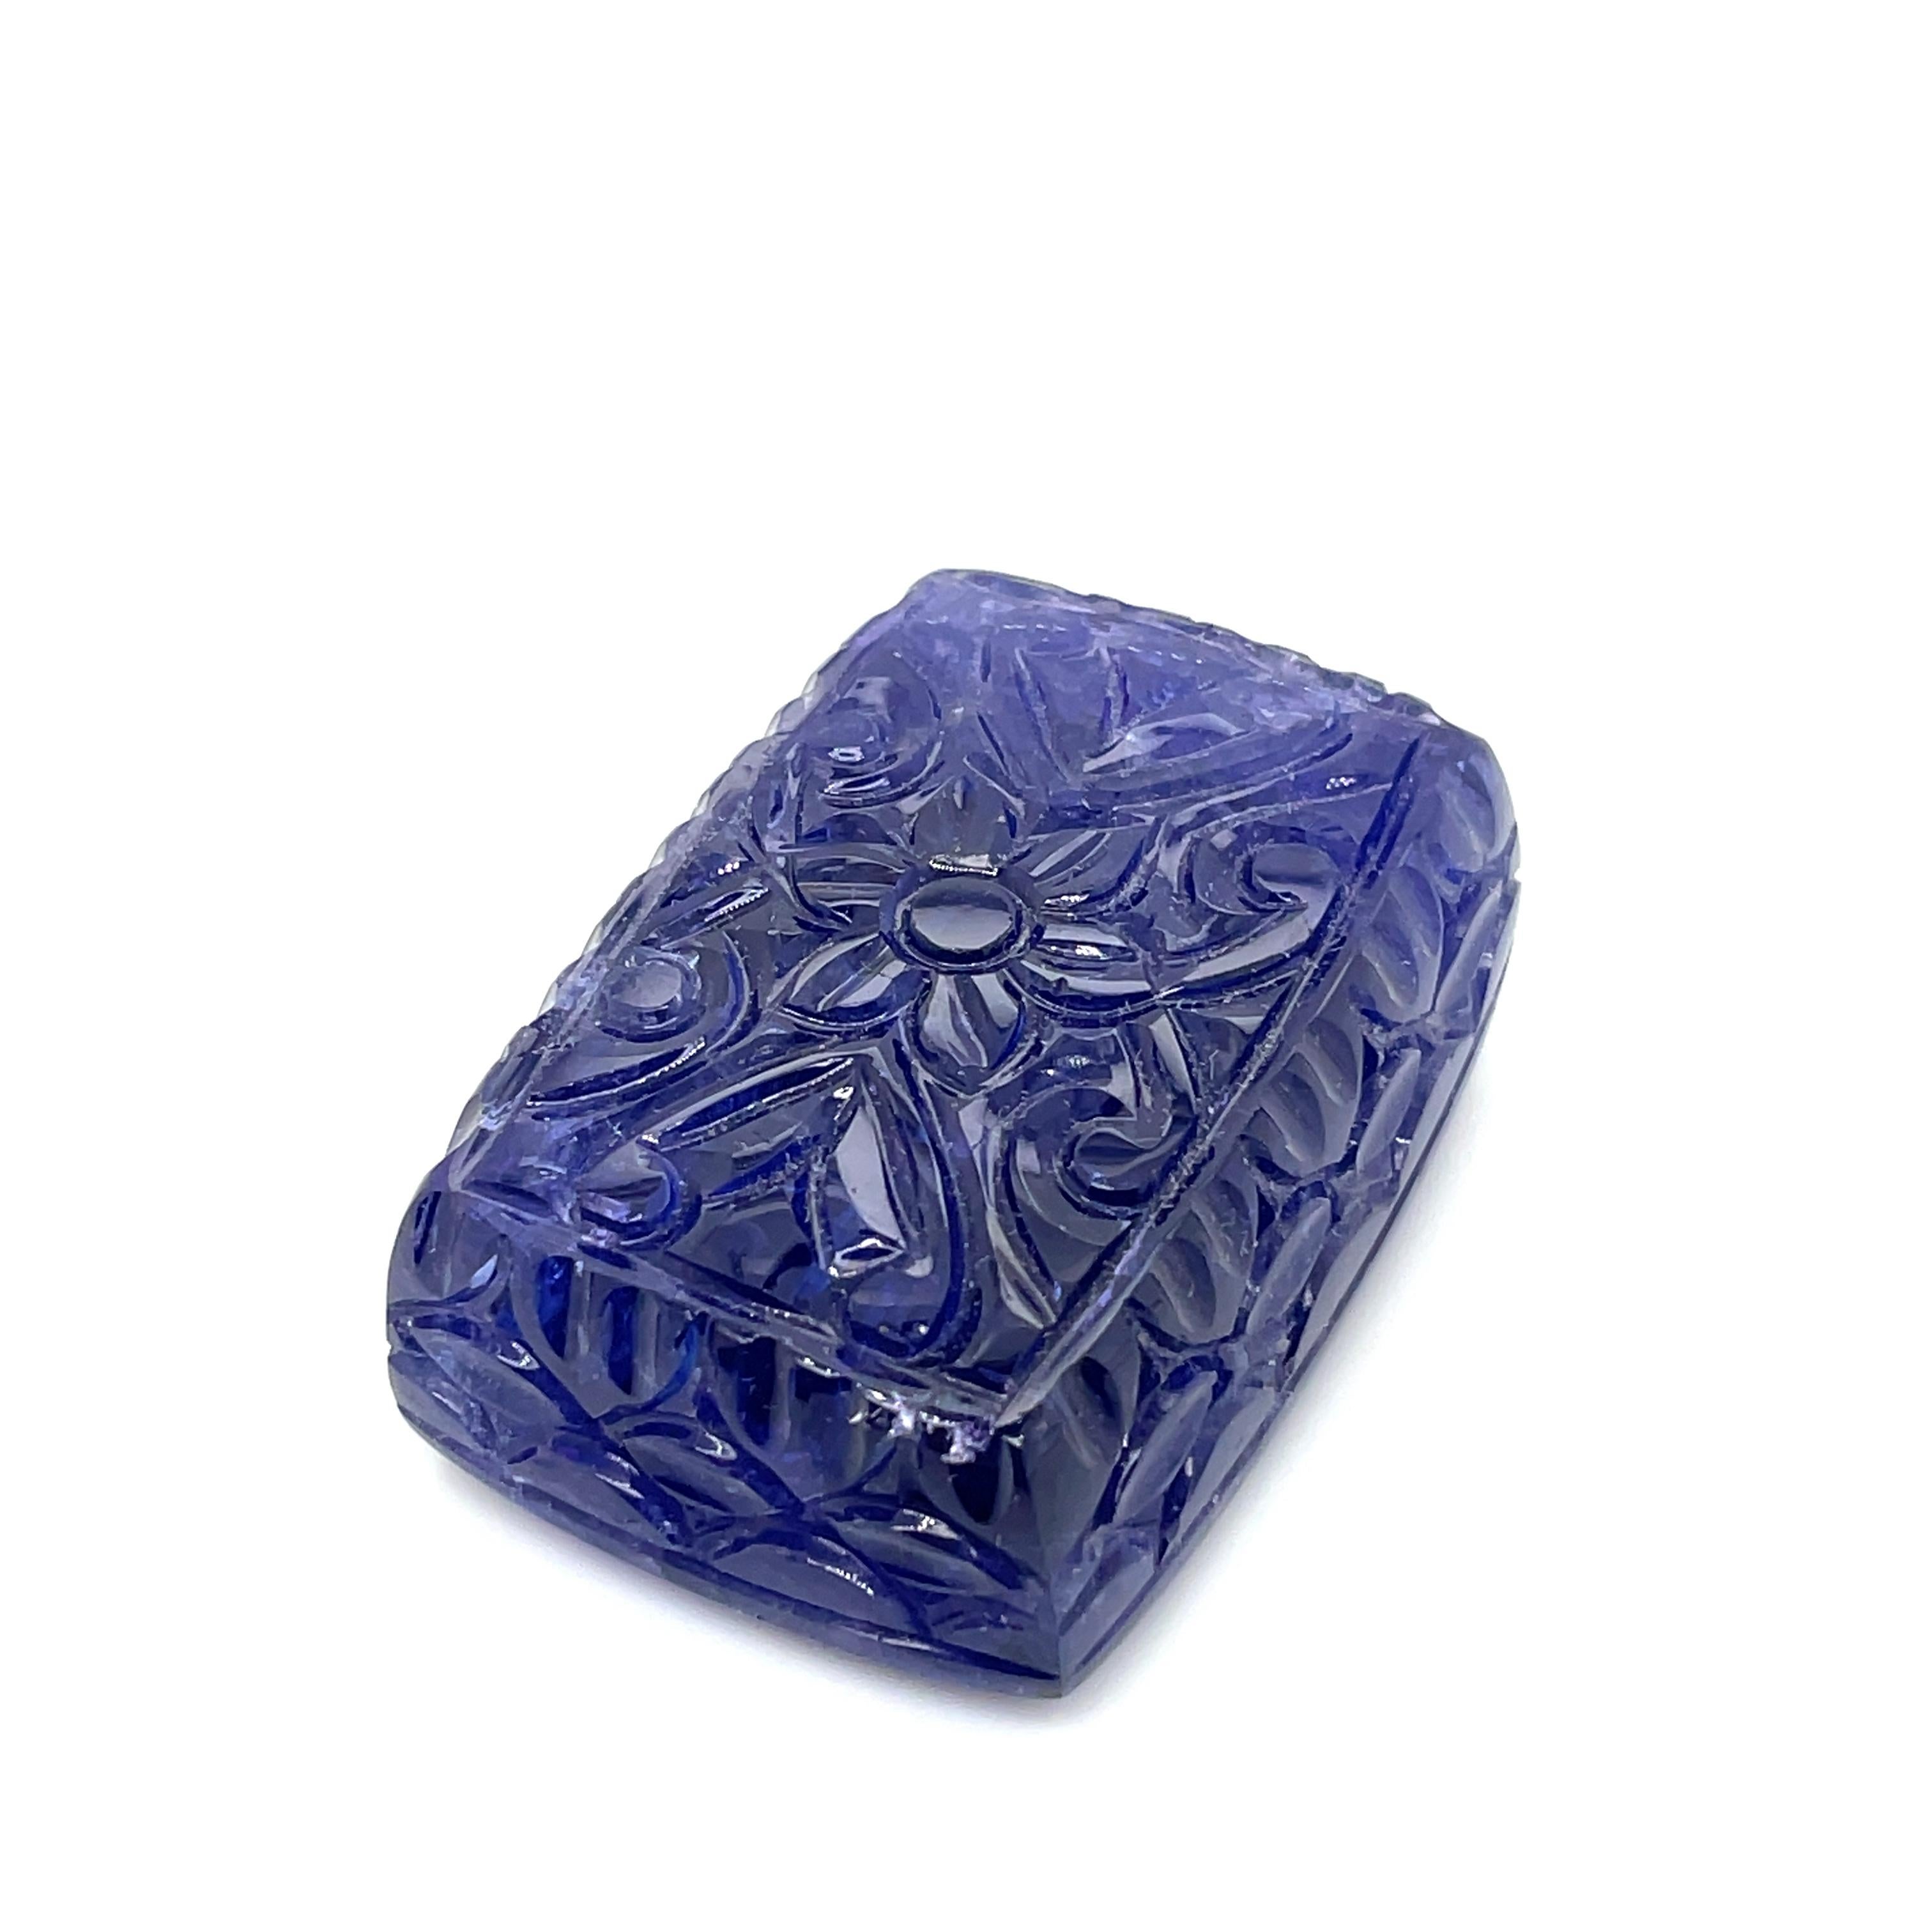 Beautifully carved with delicate floral patterns that evoke the essence of a full blossoming garden, this tanzanite masterpiece has a remarkable weight of 229.17 carats.

The flower pattern captures the essence of nature's seductive charm.

Any